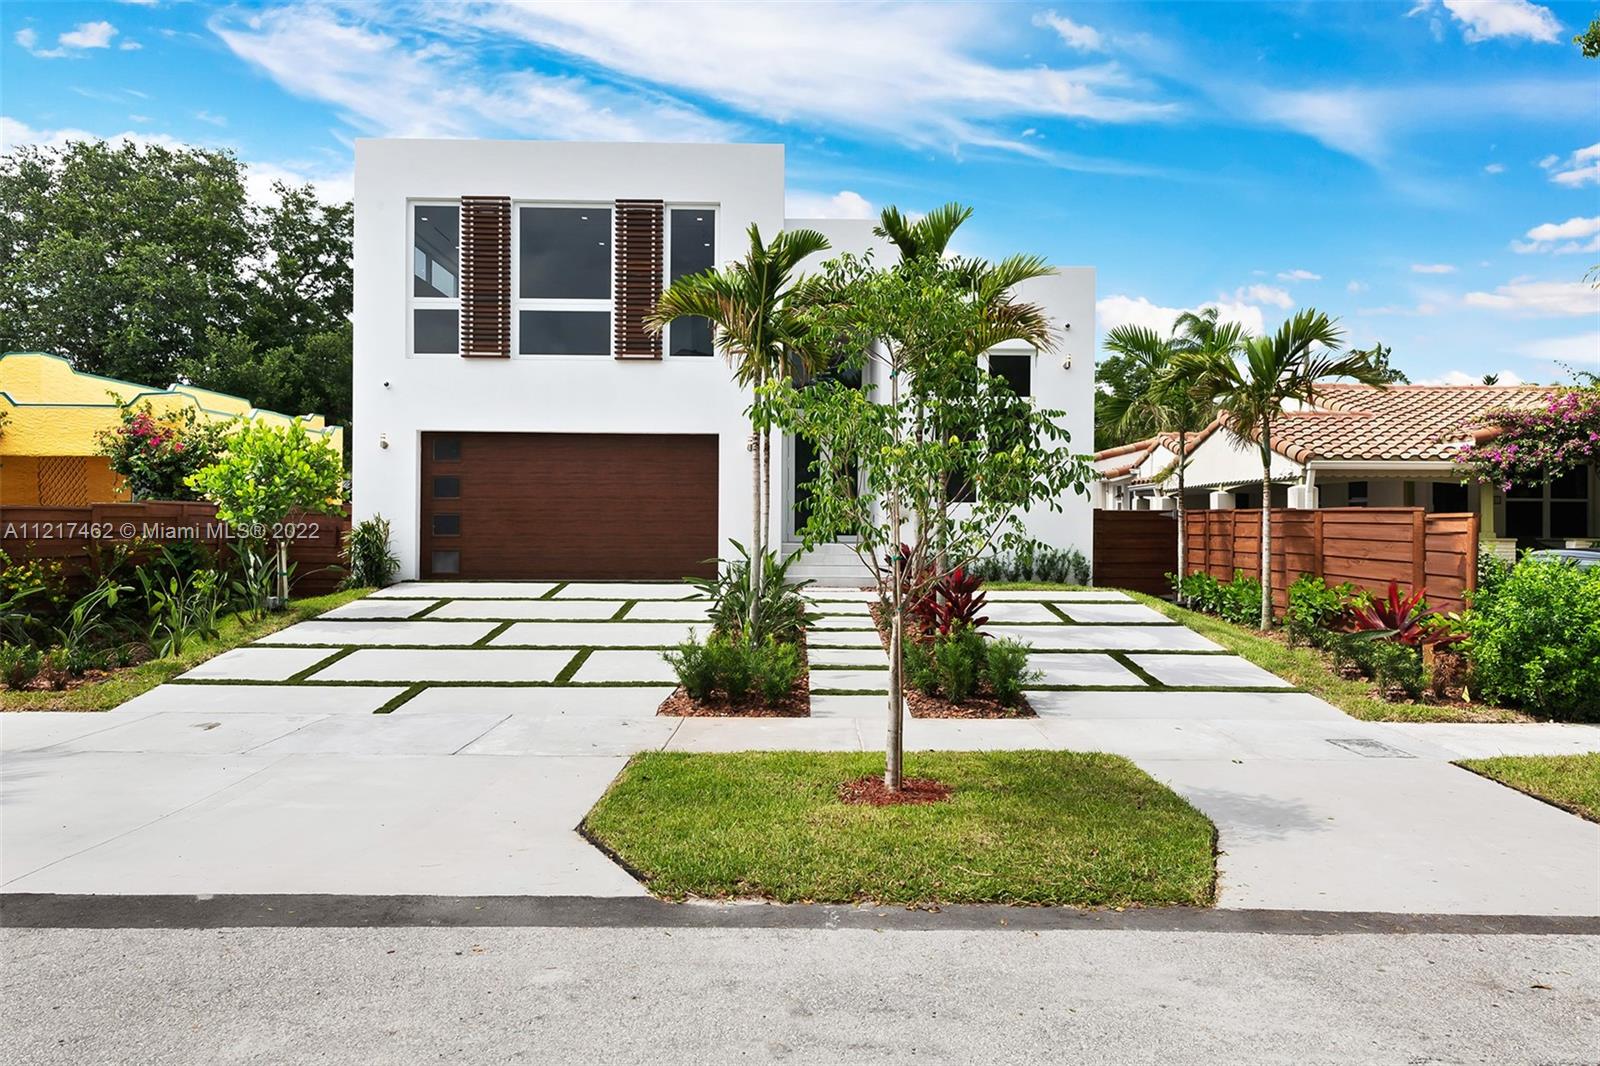 Amazing opportunity to enjoy this newer construction home in the heart of Victoria Park. Home features a 5 bedroom 5 bathroom + office + a 400sft covered terrace with built in kitchen, fireplace and TV mount. In addition, a 1200sqf terrace overlooking down town Fort Lauderdale. This is a smart home, with built in camera system and audio system including state of the art lighting throughout. Property is located just a short distance to Las Olas Blvd, beach, shops, restaurants and much more.